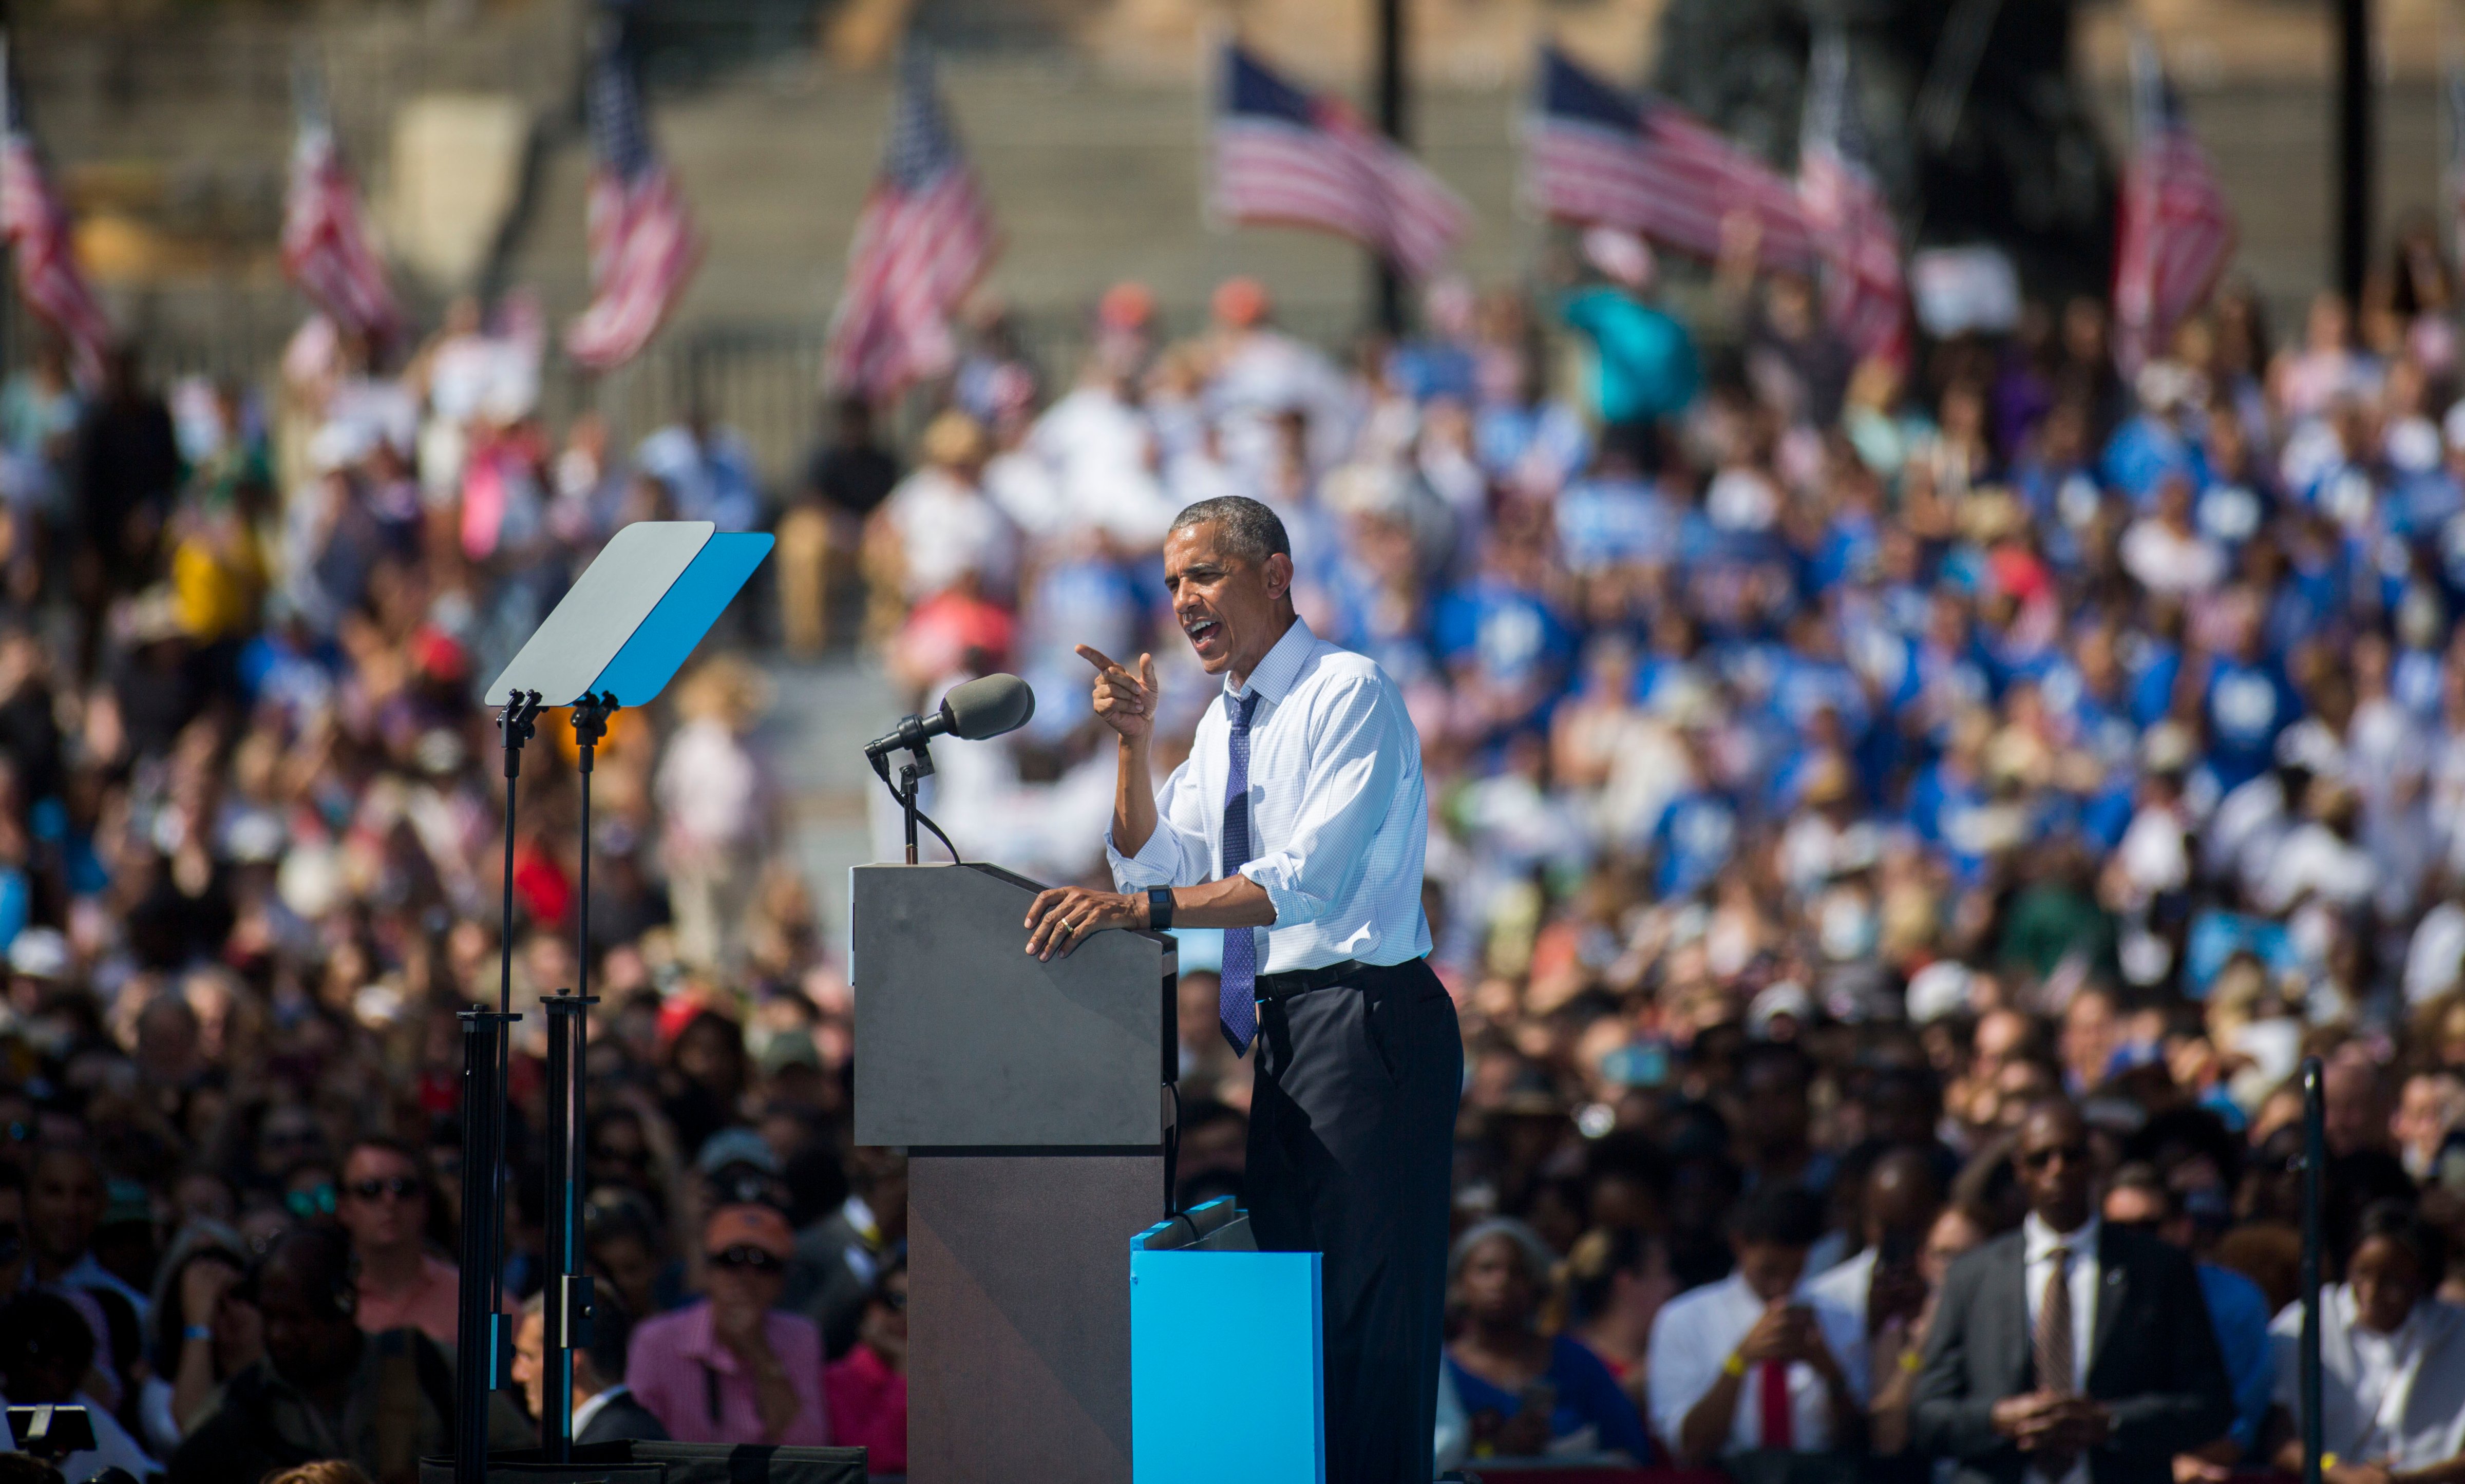 Barack Obama campaigns for Hillary Clinton outside the art museum in Philadelphia, Pennsylvania, on Sept. 13, 2016. (Jessica Kourkounis—Getty Images)